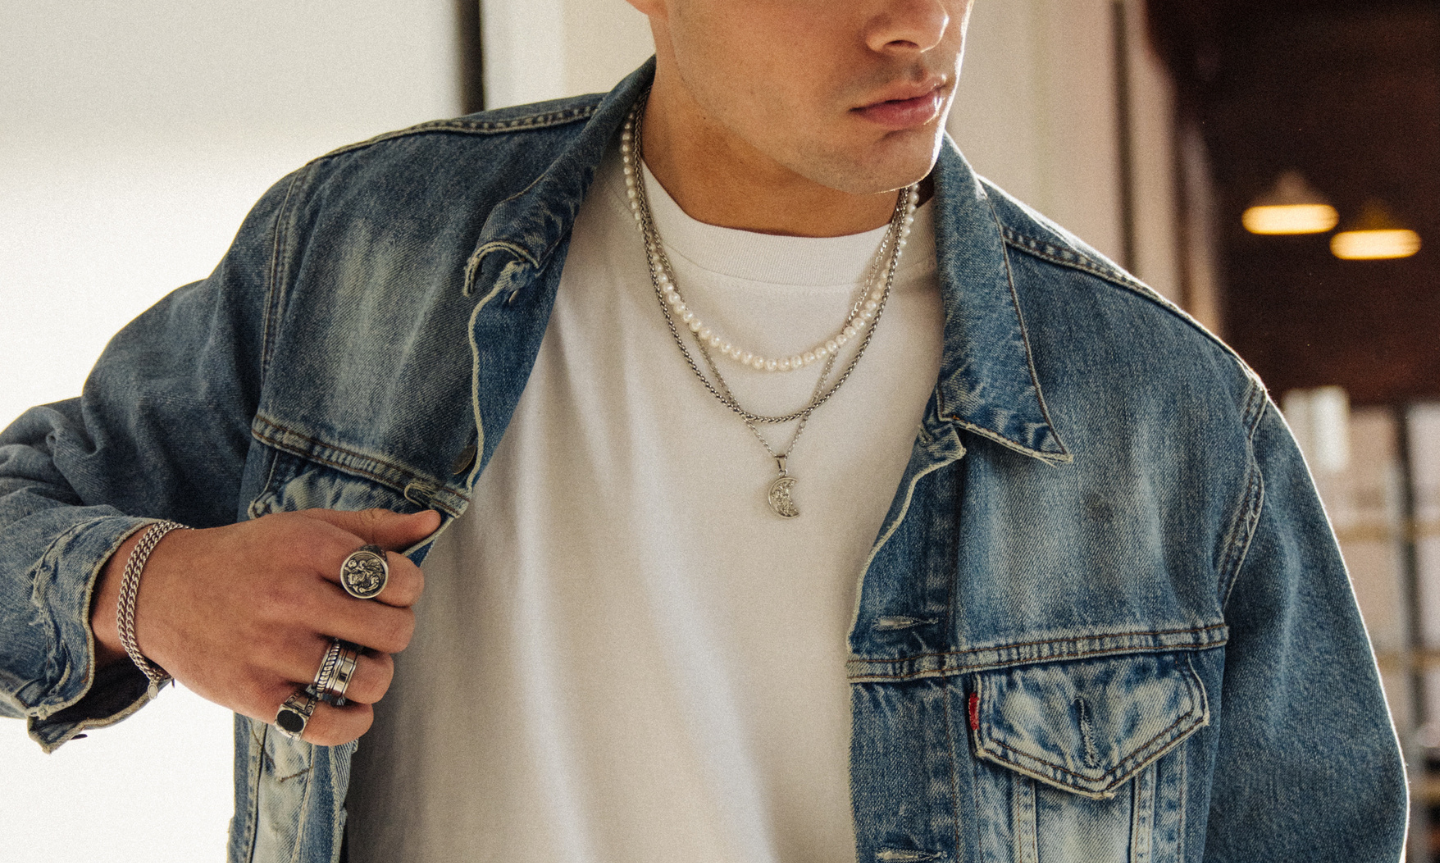 Man wearing a plain white t-shirt with a denim jacket and silver pendant necklaces and cuban link chains